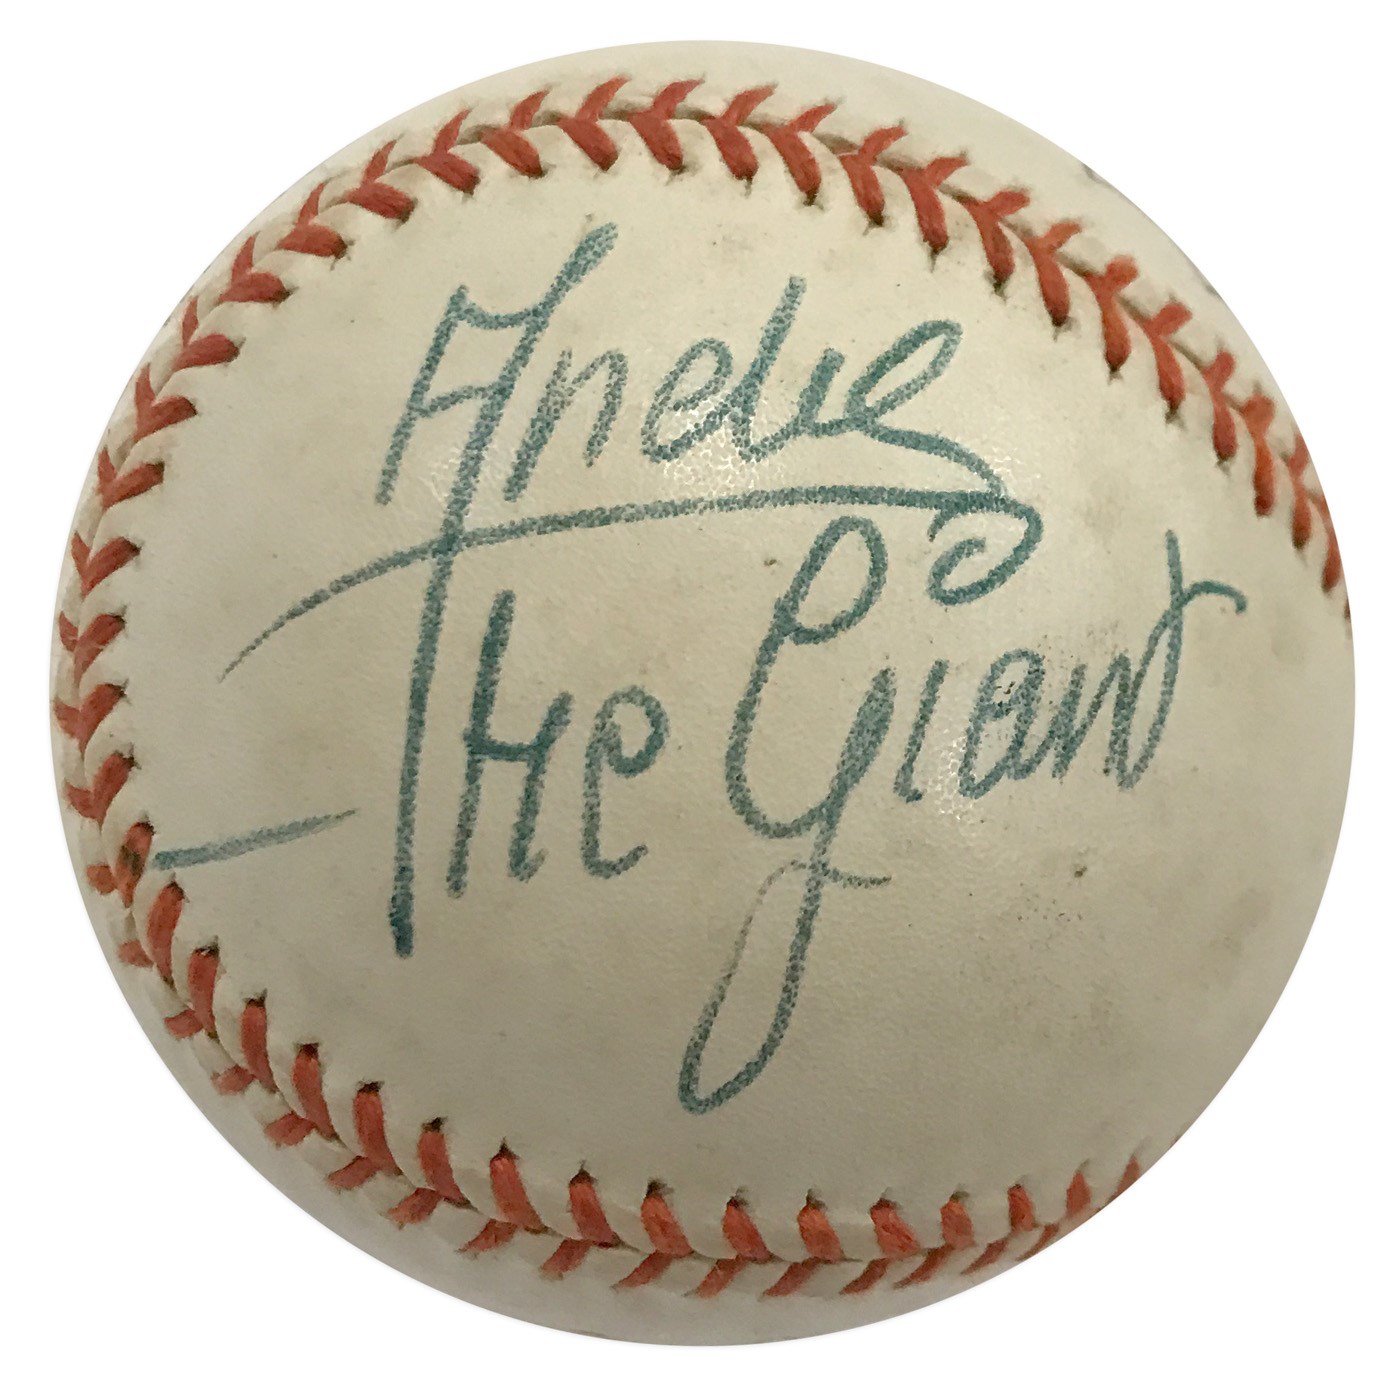 - The Only Known Andre the Giant Single-Signed Baseball